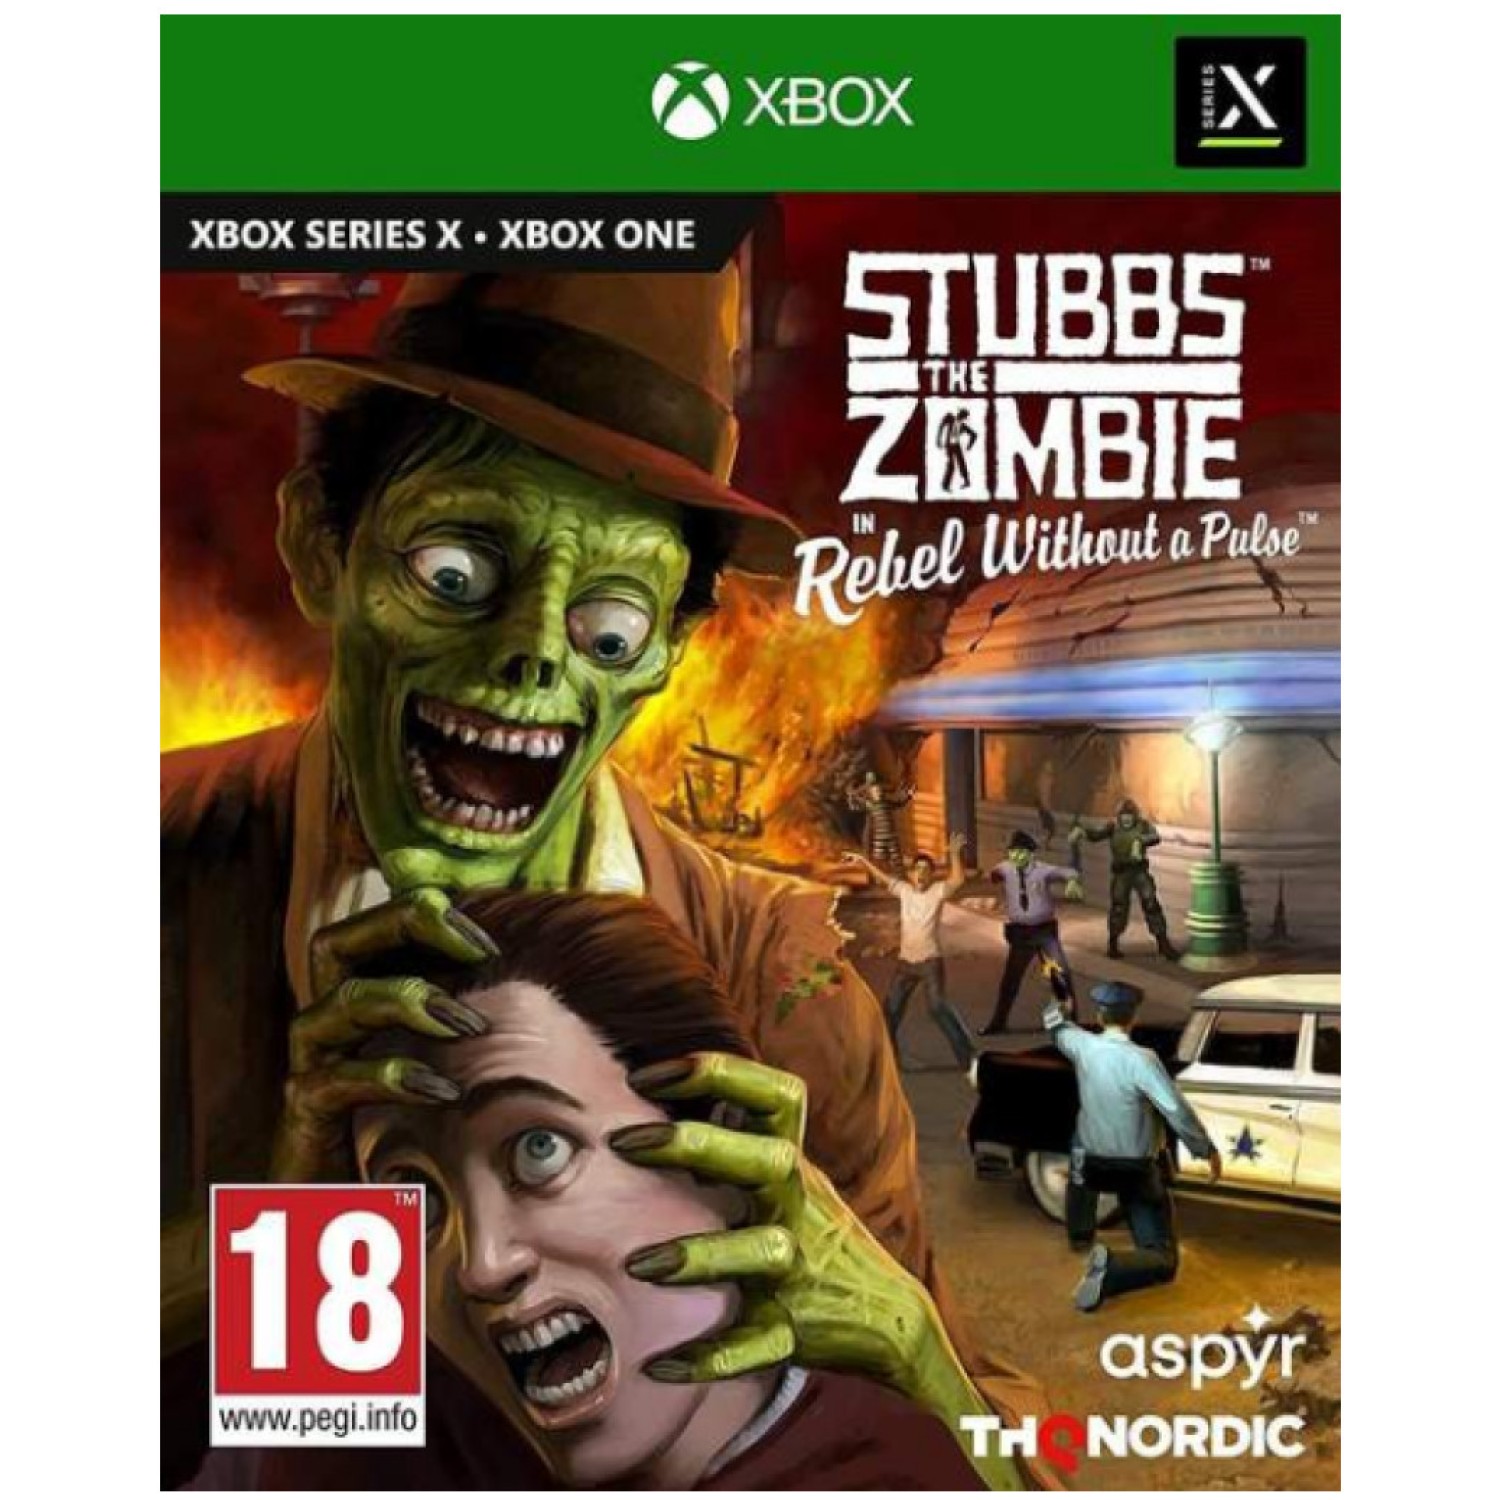 Igra za Xbox One/Series X Stubbs the Zombie in Rebel Without a Pulse